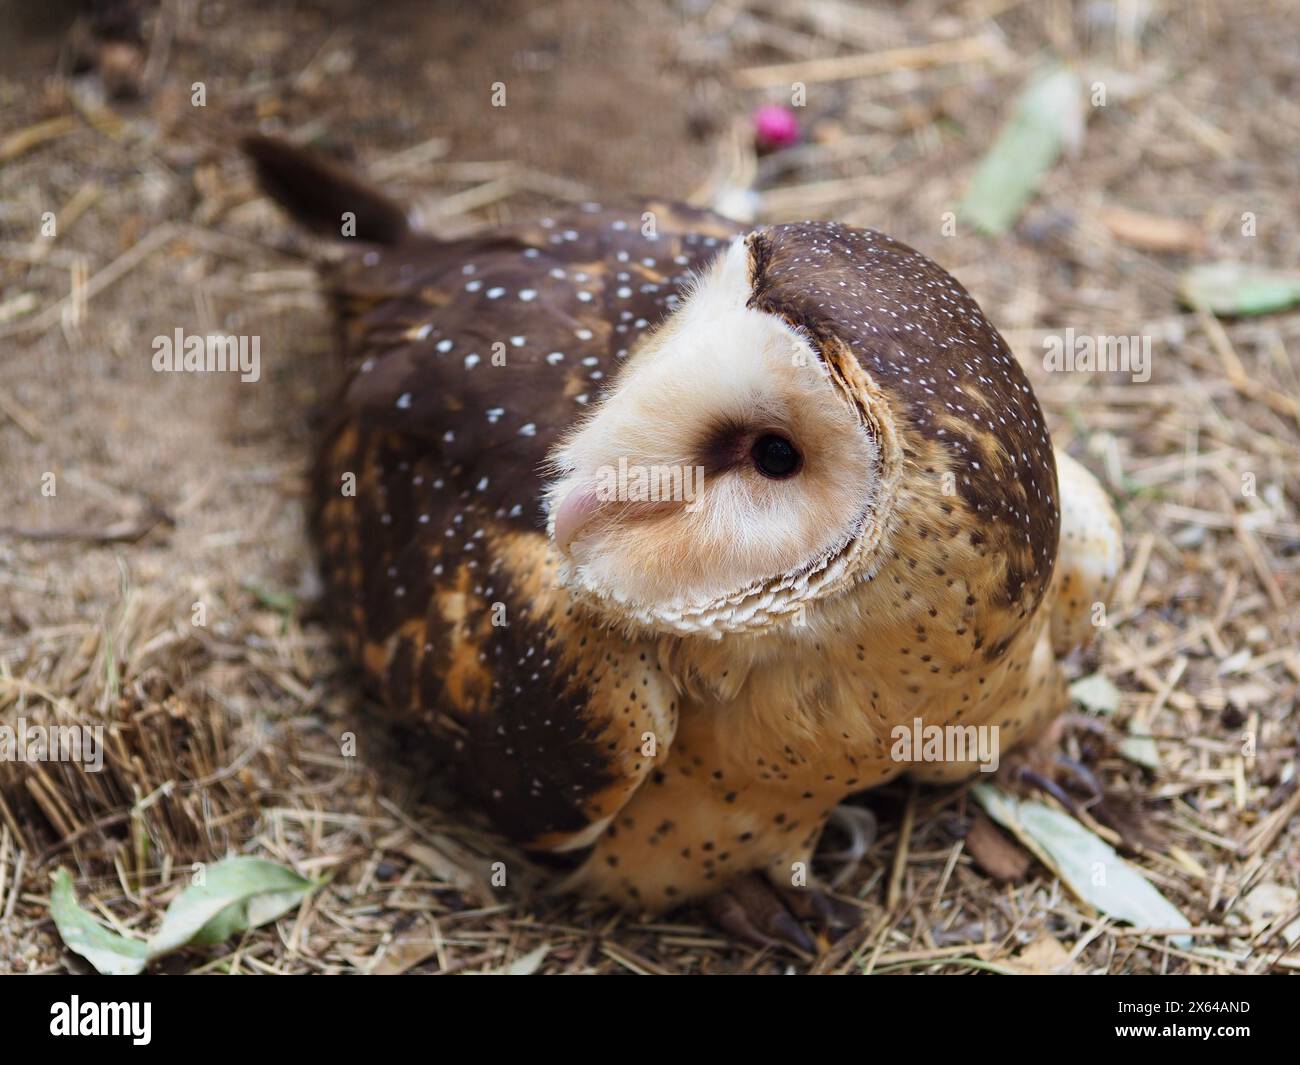 Magnificent regal Australasian Grass Owl in outstanding beauty. Stock Photo